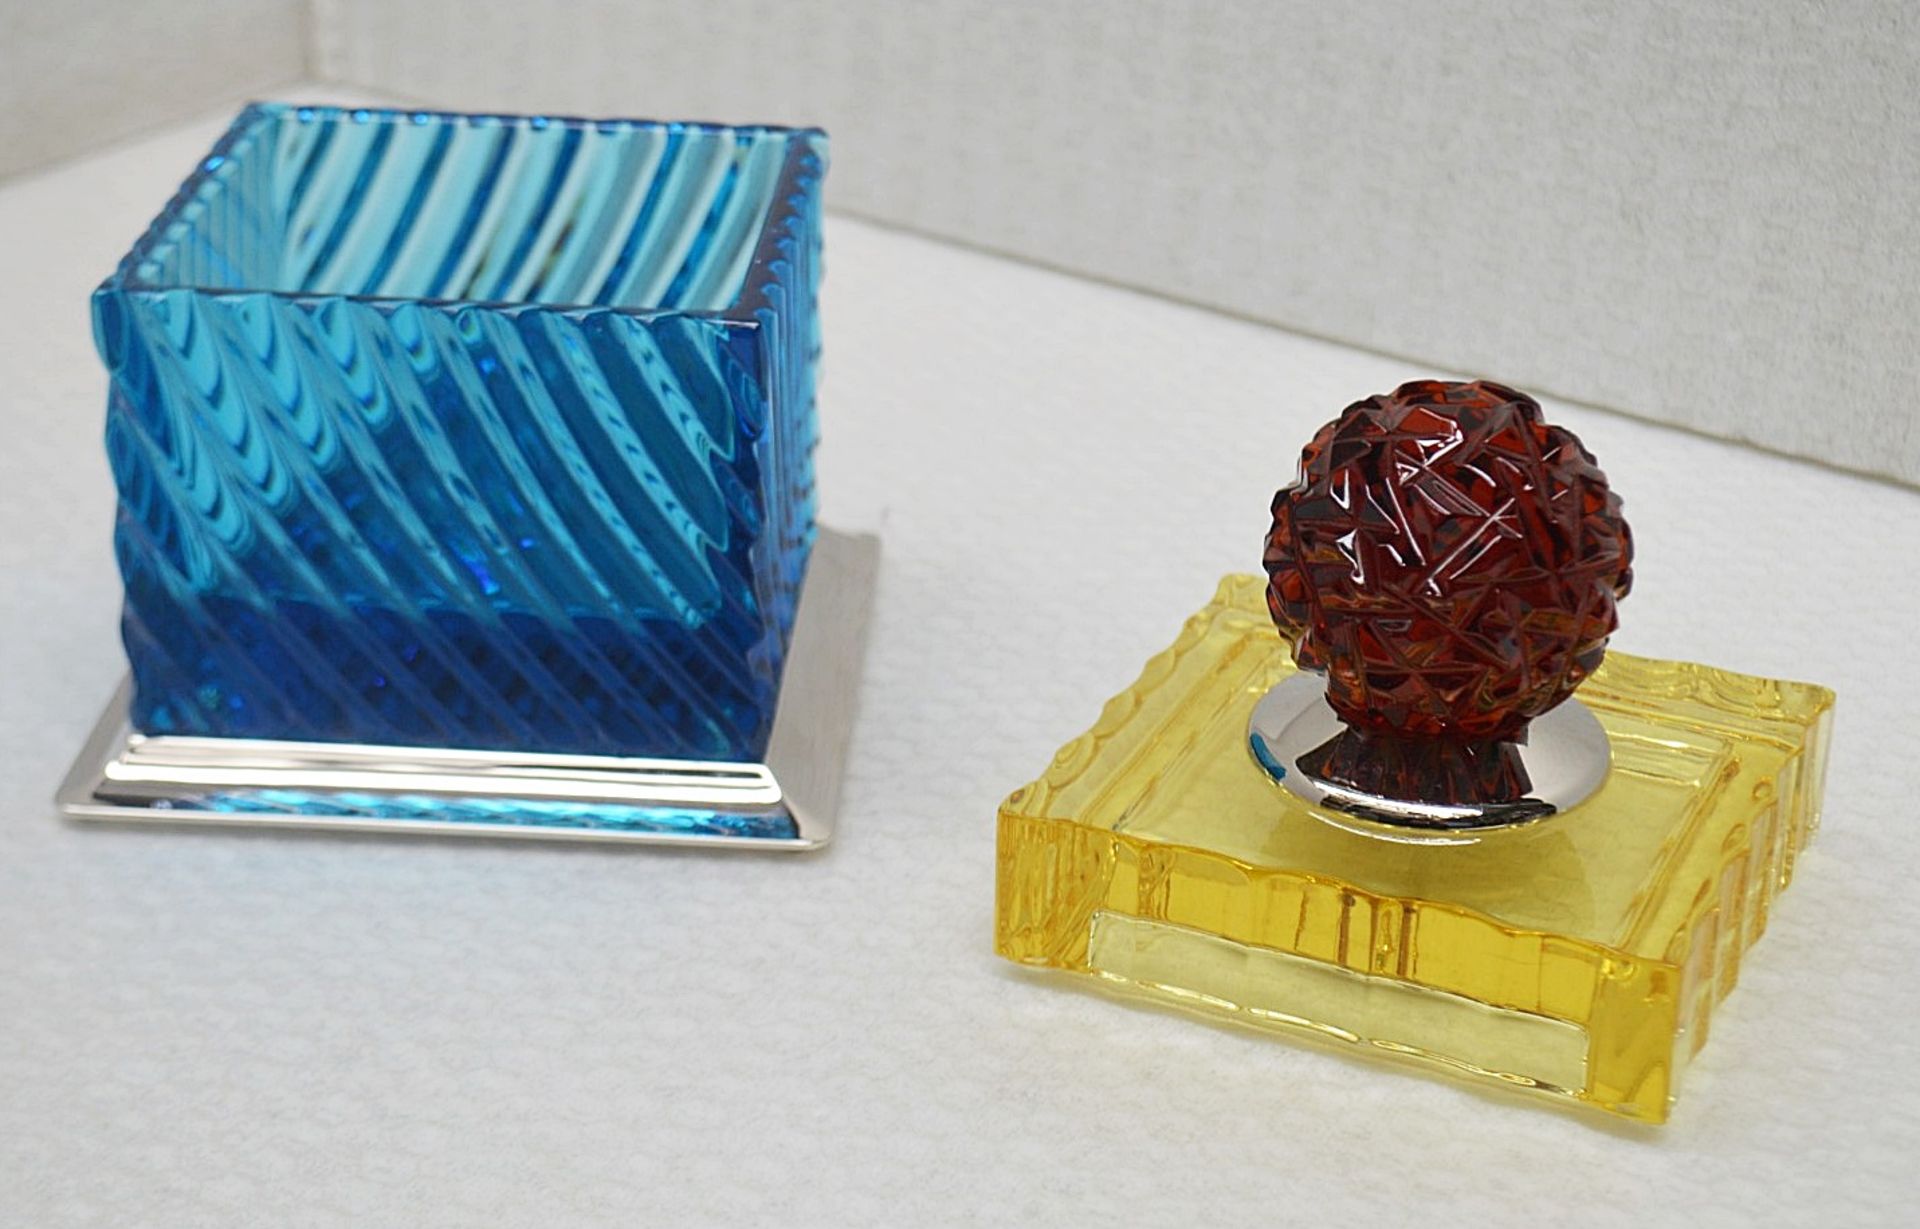 1 x BALDI 'Home Jewels' Italian Hand-crafted Artisan Crystal Box In Blue & Yellow, With A - Image 5 of 5